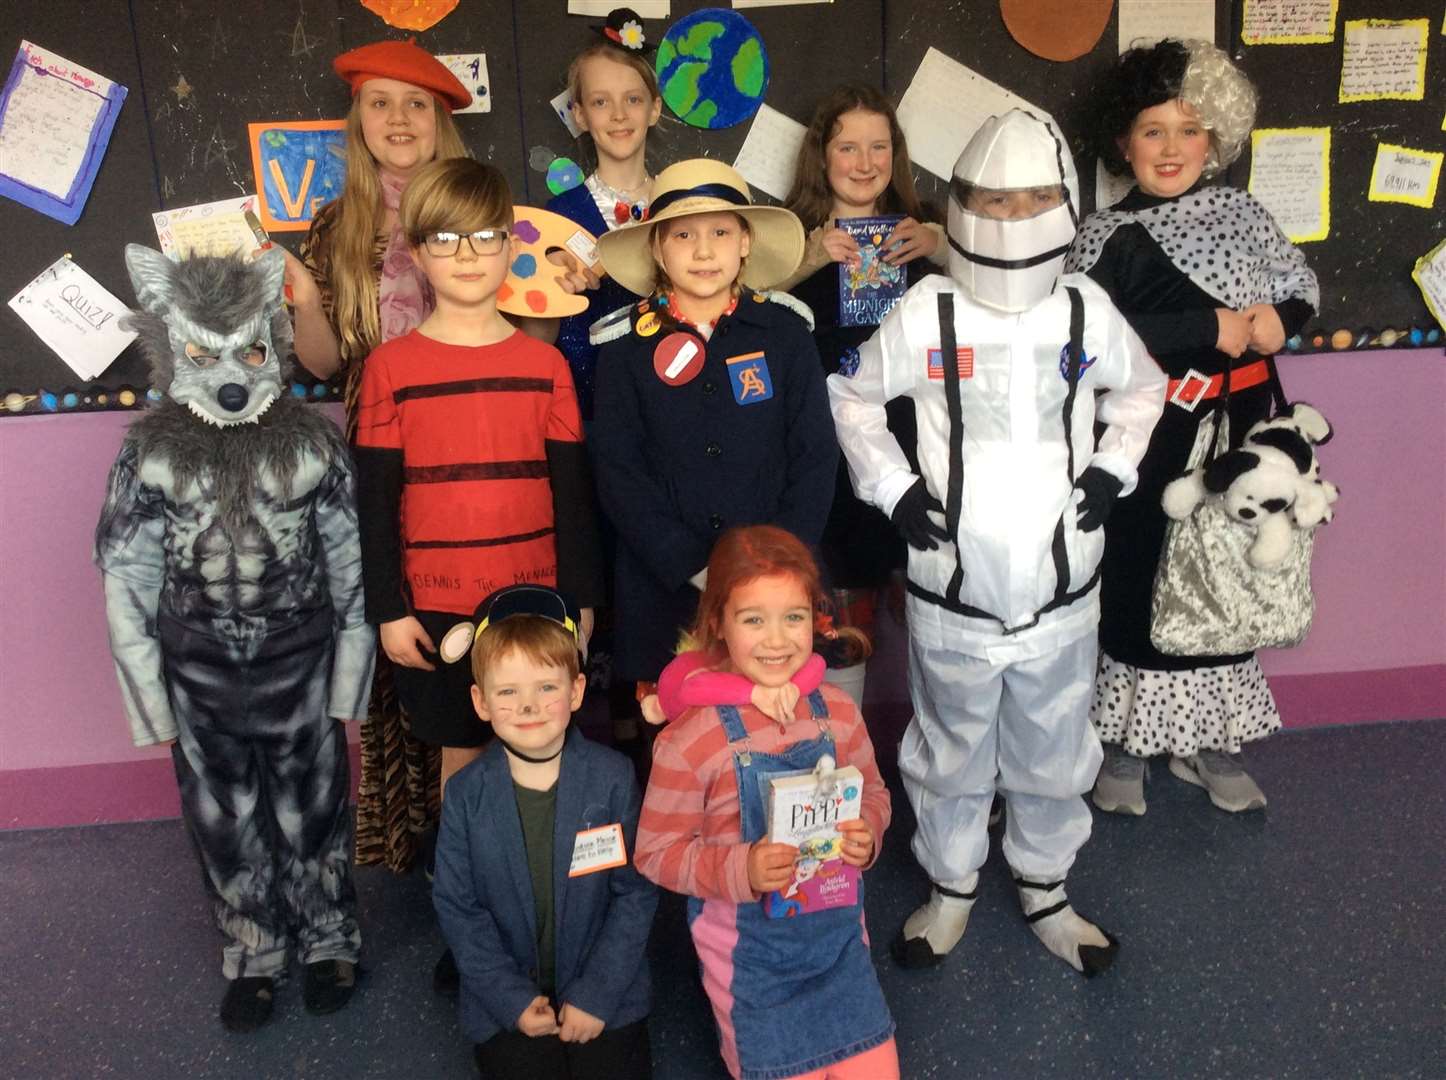 World Book Day dressing-up winners at Halkirk Primary School.